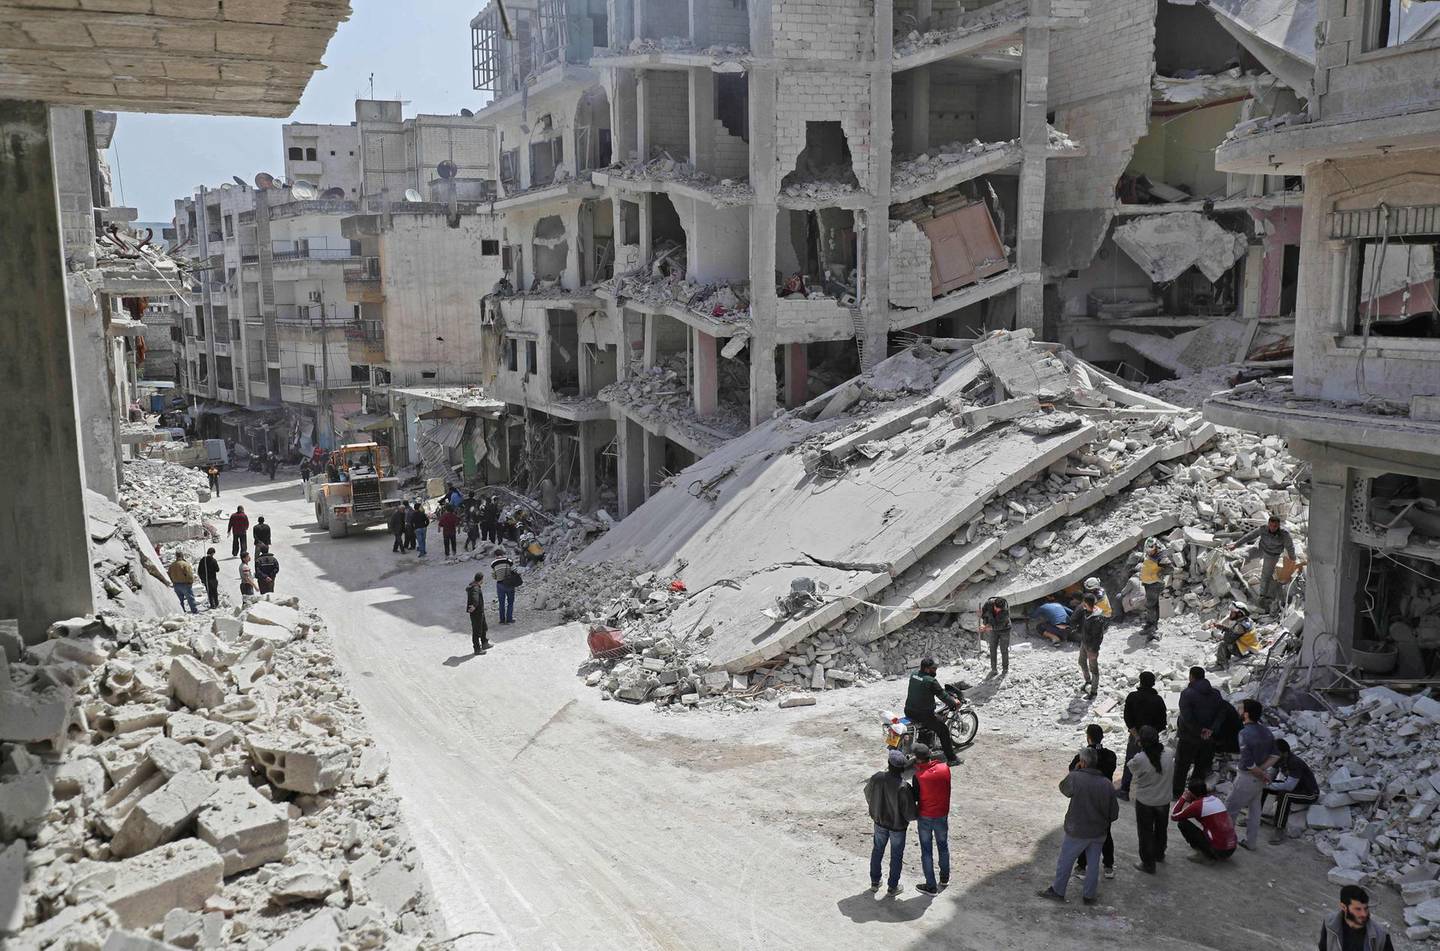 People watch as members of the Syrian Civil Defence, also known as the "White Helmets", search the rubble of a collapsed building following an explosion in the town of Jisr al-Shughur, in the west of the mostly rebel-held Syrian province of Idlib, on April 24, 2019. Over a dozen people, all but two civilians, were killed in an explosion in the jihadist-held region of Idlib in northwest Syria on Wednesday, the Britain-based Syrian Observatory for Human Rights said. The cause of the blast was not immediately clear. Idlib province is under administrative control of Hayat Tahrir al-Sham, Syria's former Al-Qaeda affiliate, with the Turkestan Islamic Party, a group of foreign jihadists from the ethnic Uighur Muslim minority, also having a large presence in the town. / AFP / OMAR HAJ KADOUR
